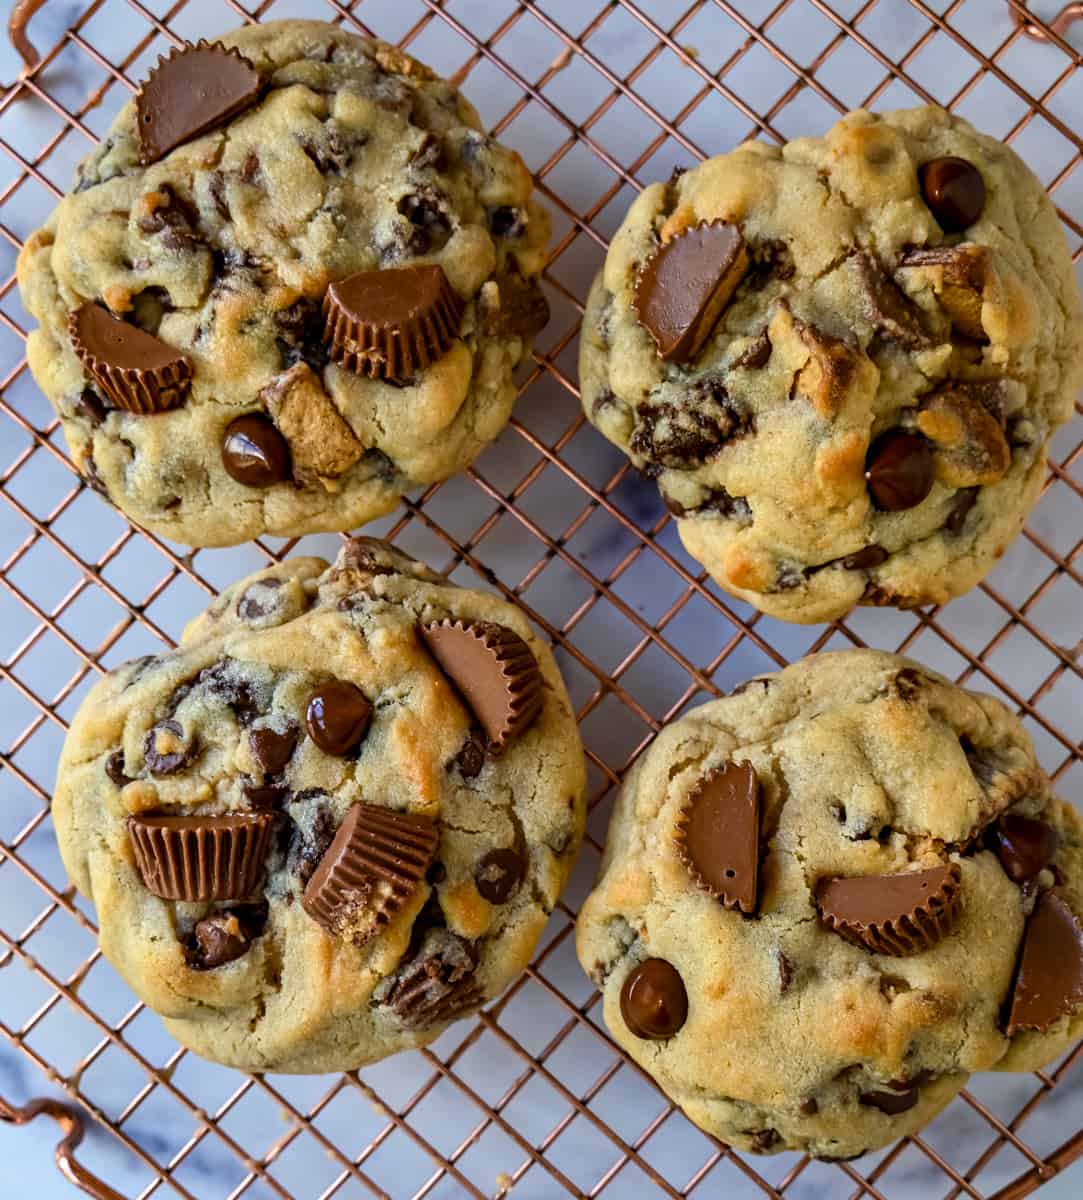 Reese's Chocolate Peanut Butter Cup Cookies. Soft, chewy, thick bakery-style chocolate peanut butter cup cookies made with Reese's peanut butter cups. Chocolate peanut butter lovers will love these cookies!